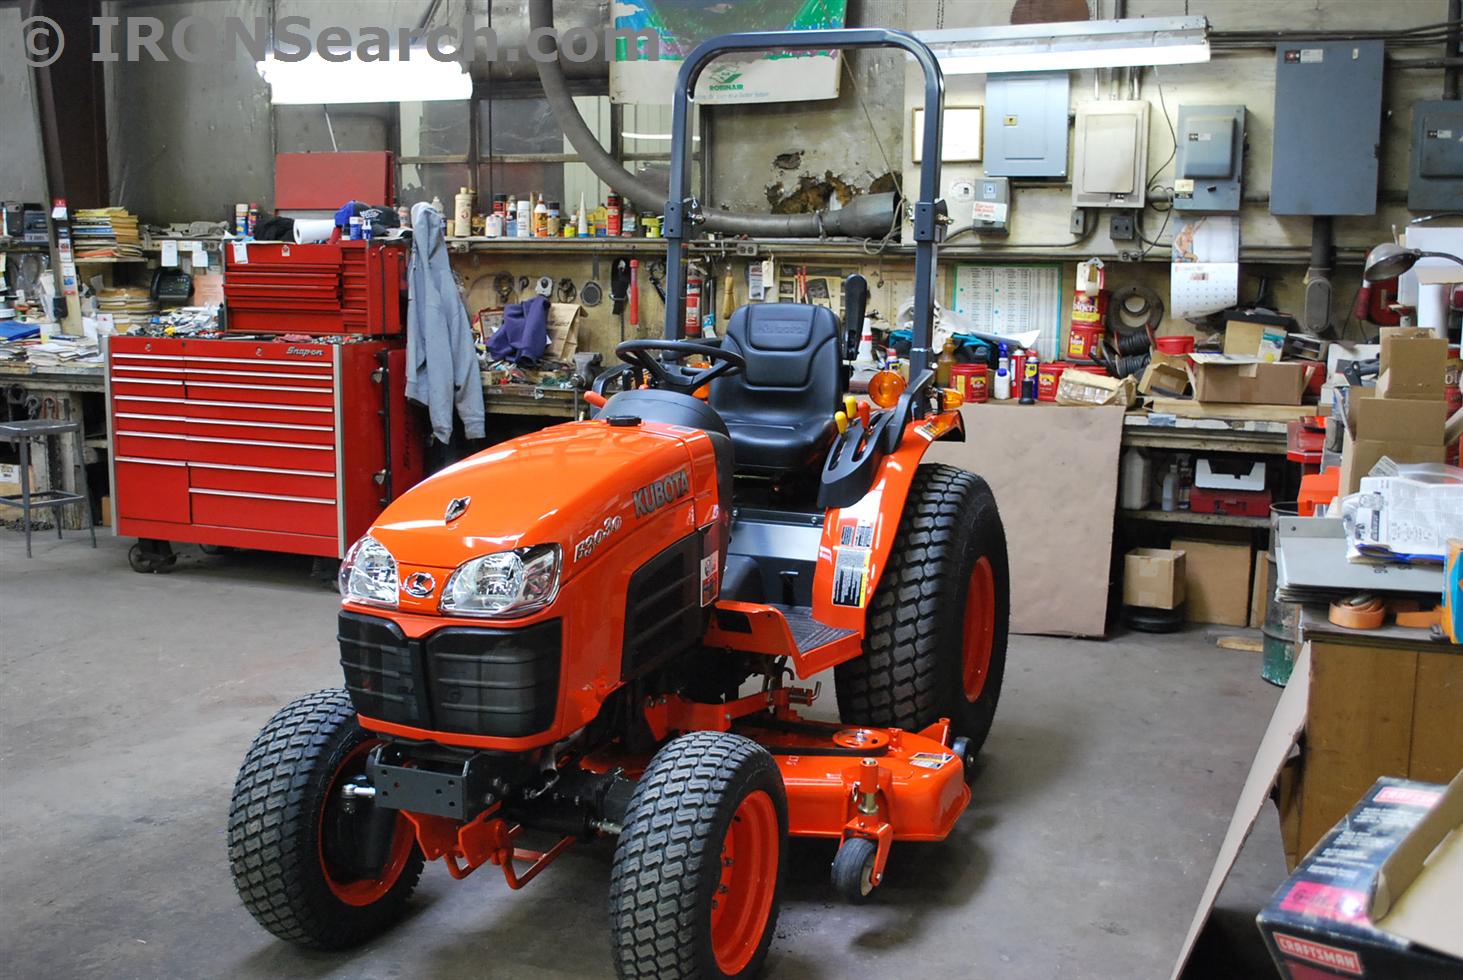 IRON Search - 2012 Kubota B3030 Tractor Compact For Sale By ...